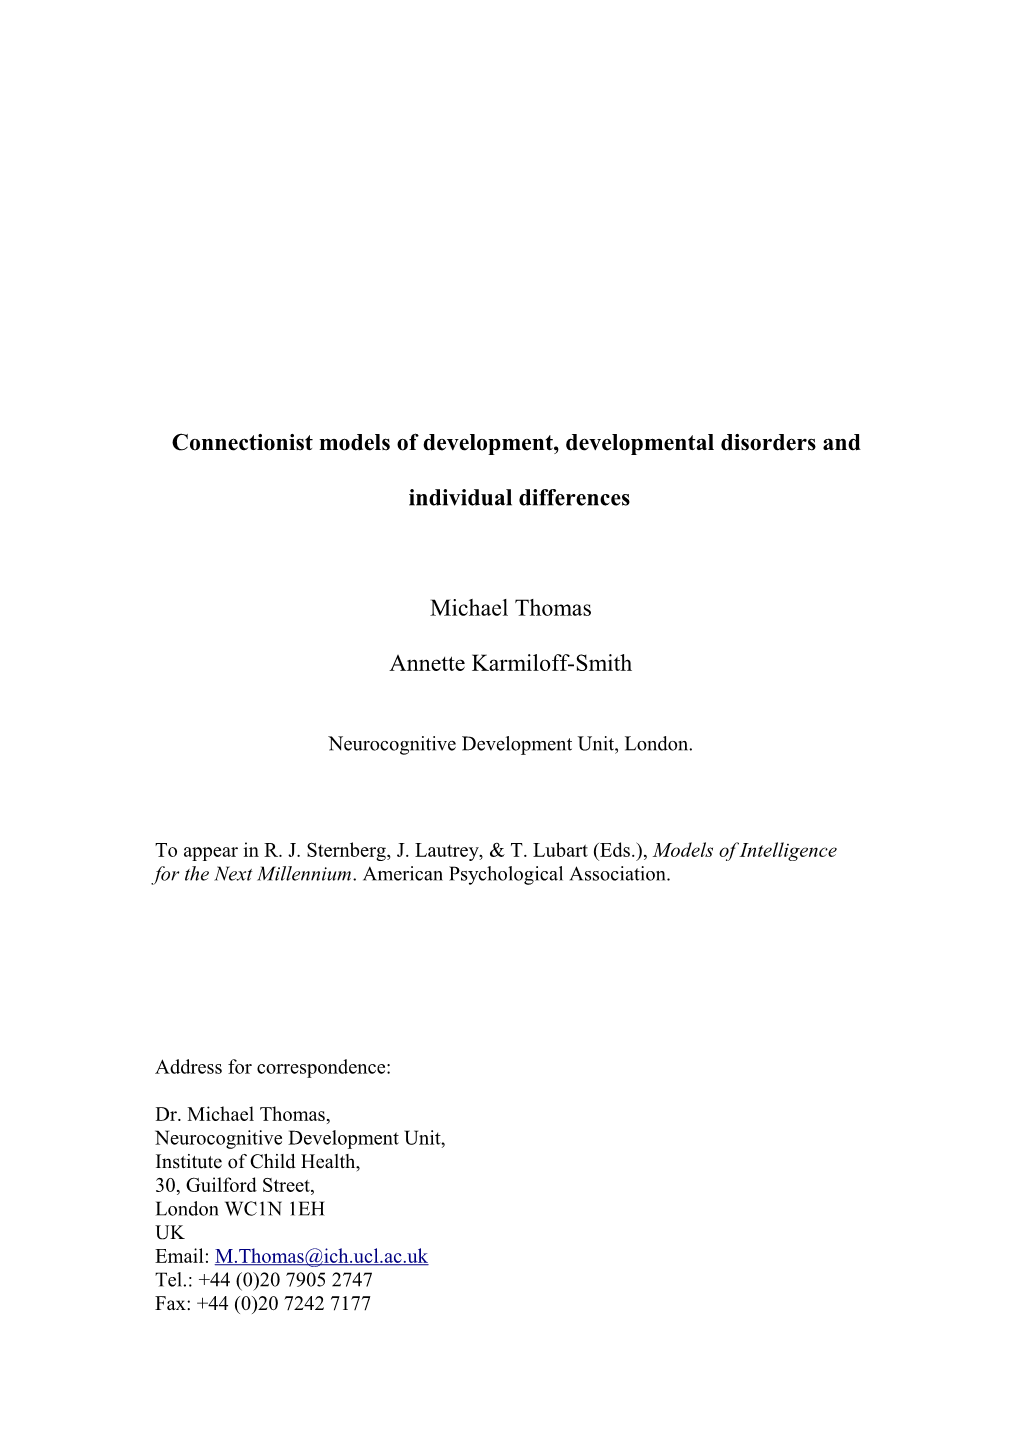 Connectionist Models of Developmental Disorders and Individual Differences